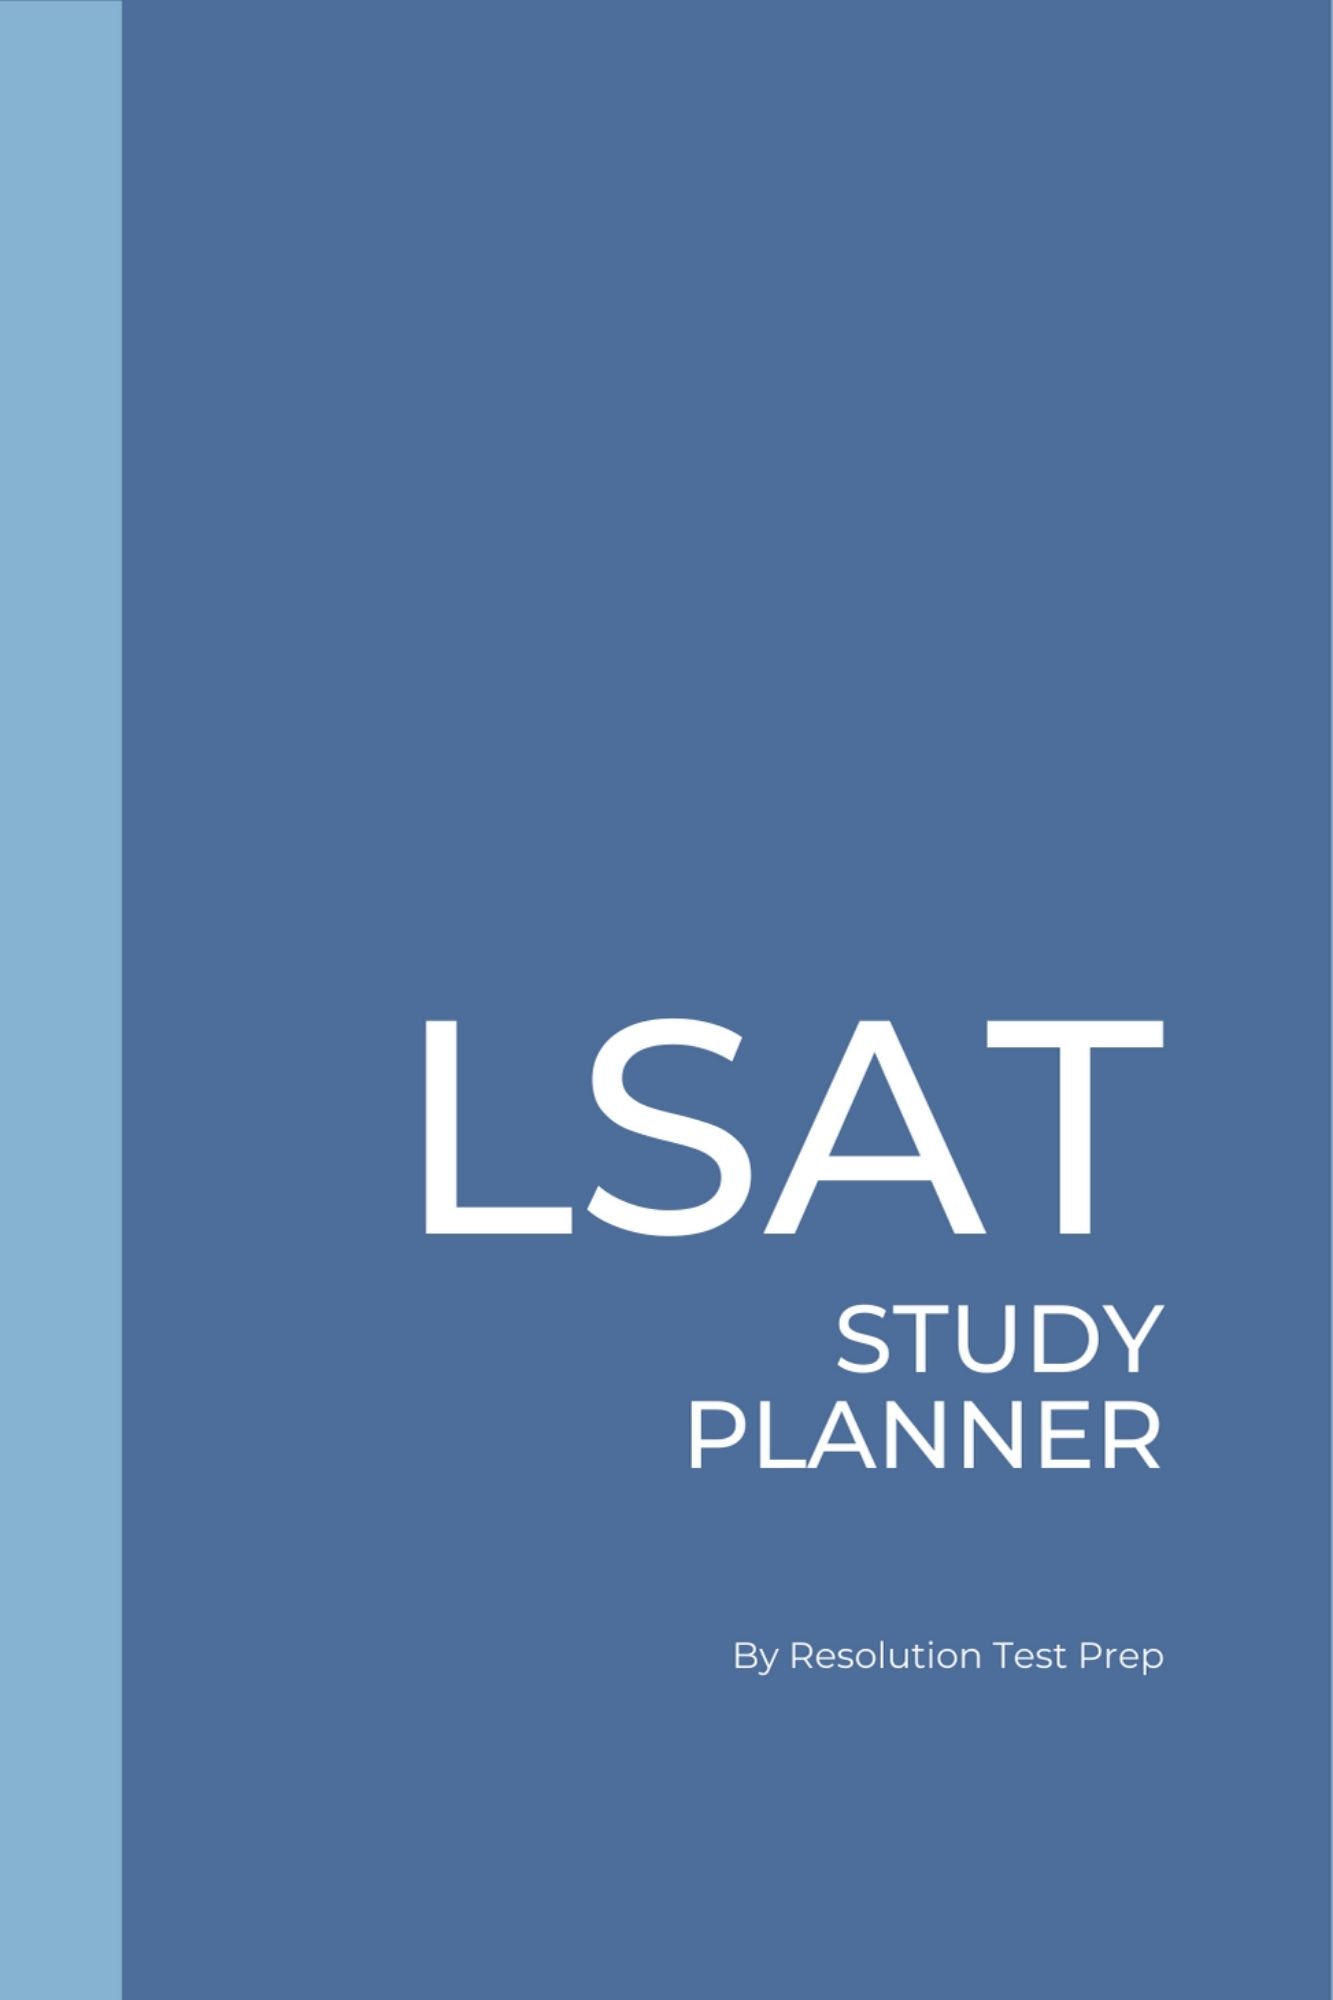 LSAT Study Planner front cover